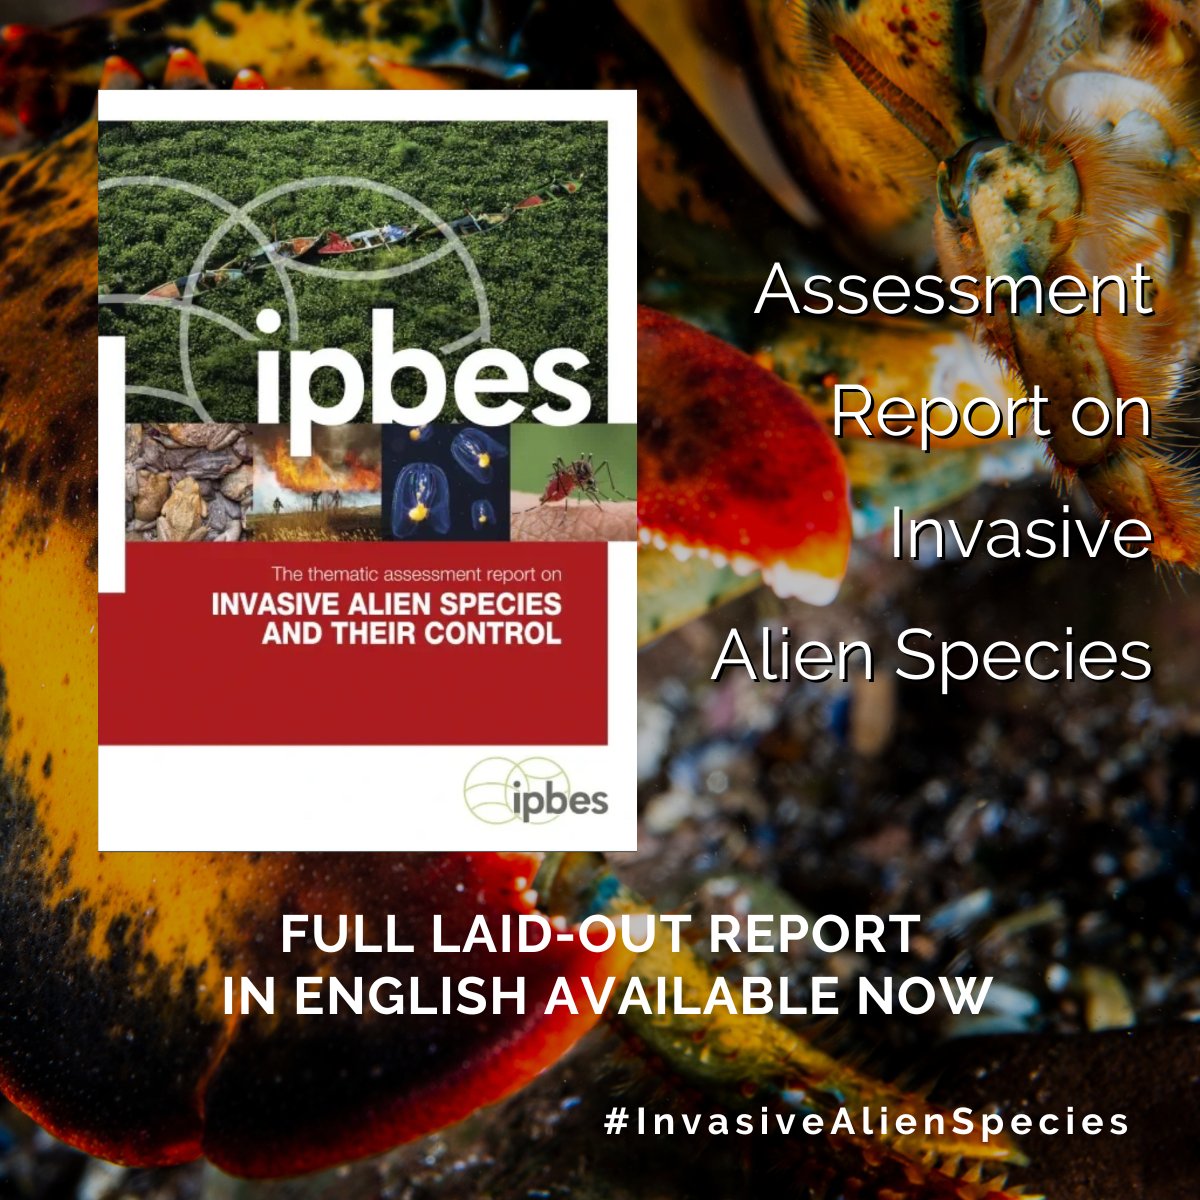 OUT NOW: The laid-out version of the FULL @IPBES #InvasiveAlienSpecies Report 💥 Do you want to know more about status and trends of biological invasions around the world? 🤔 Access the full report in English⬇️ ipbes.net/ias